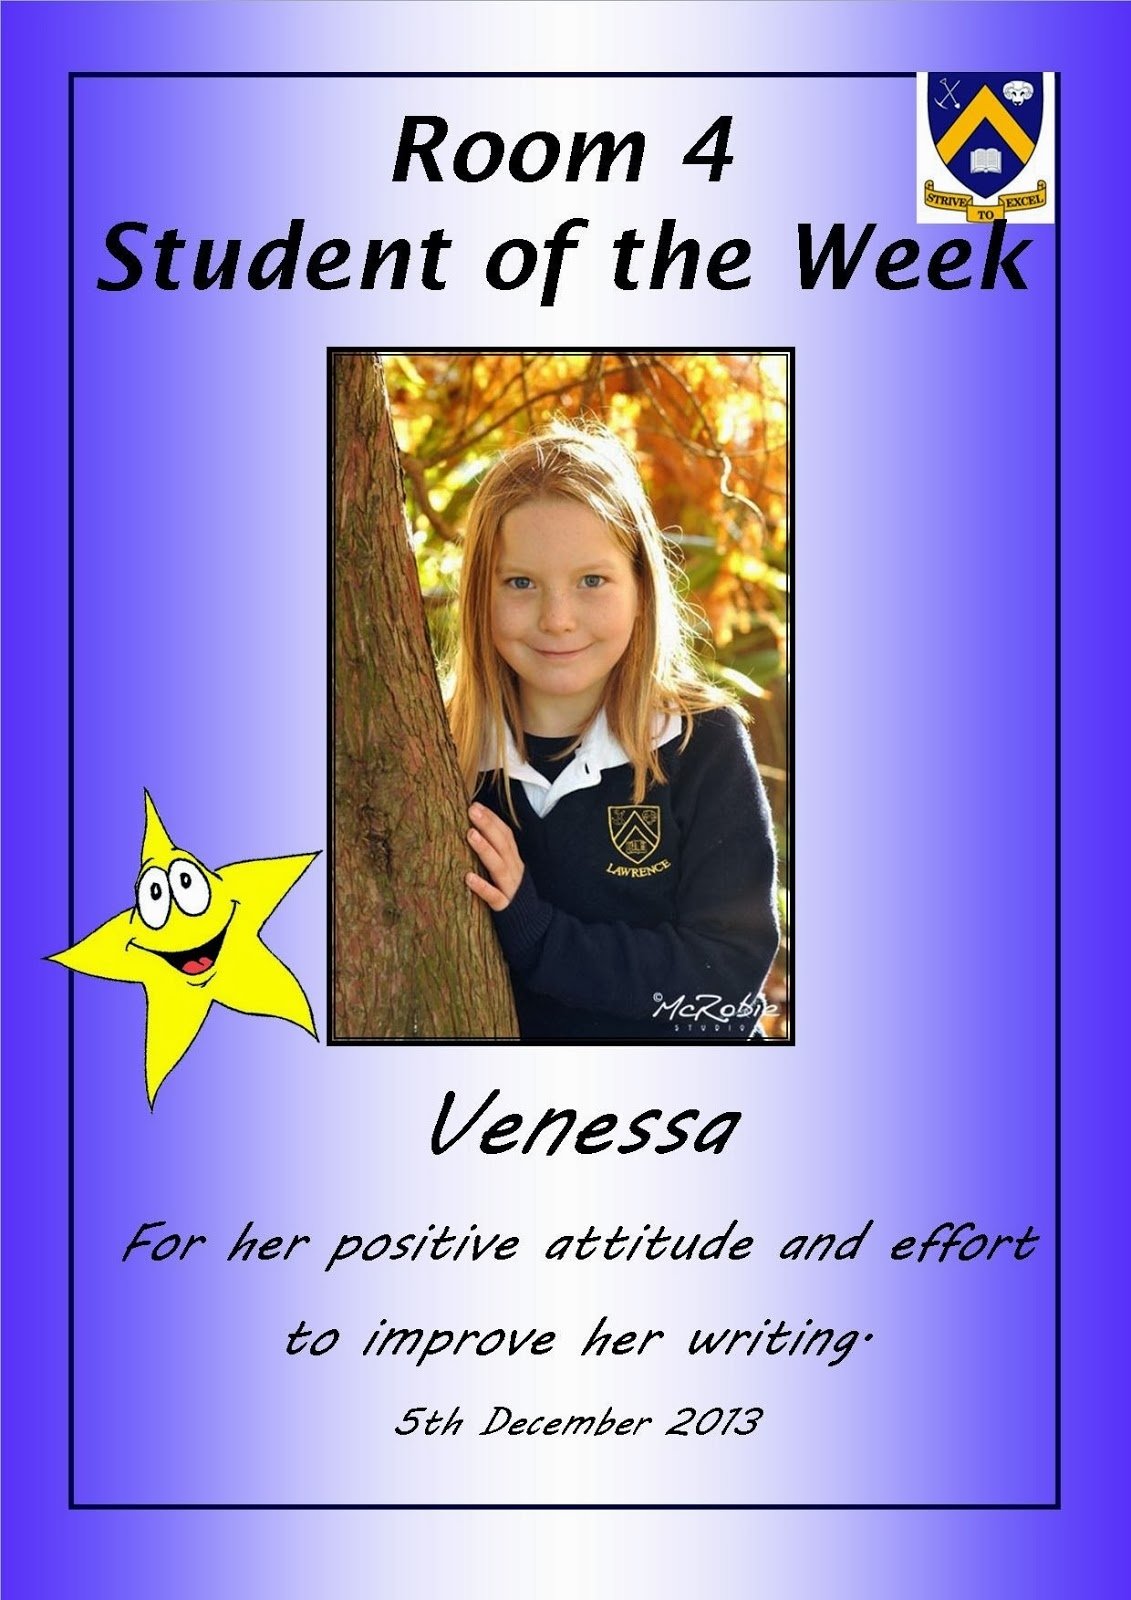 10 Awesome Student Of The Week Ideas room 4 lawrence area school student of the week venessa 2022